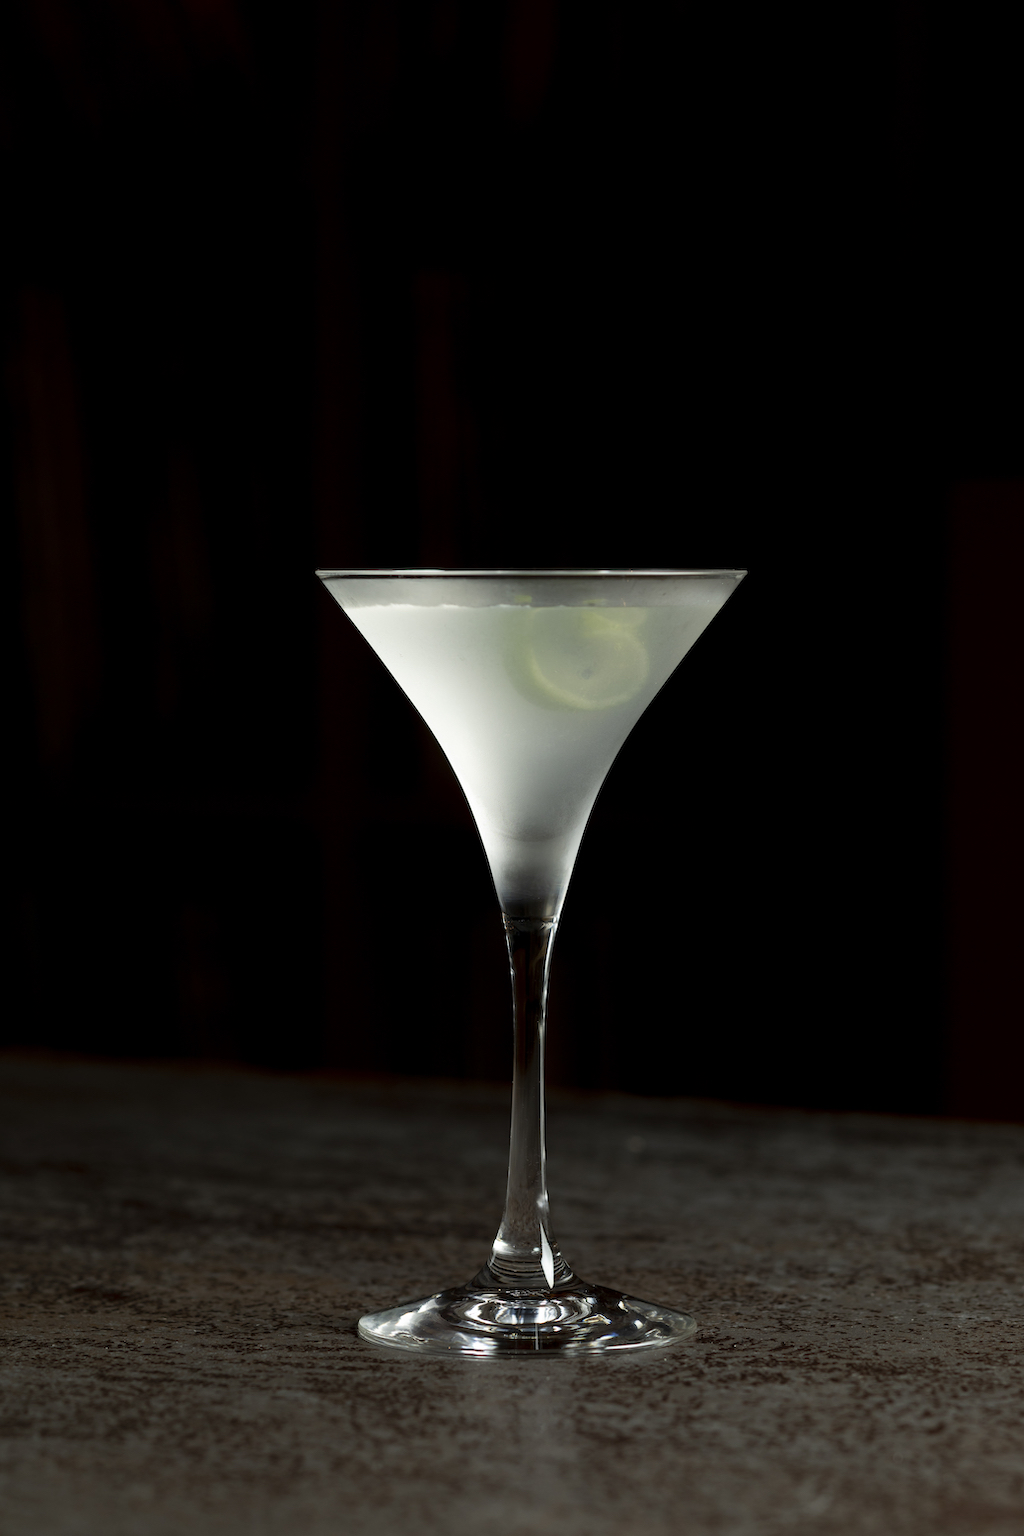 Viva Tirado, a cocktail by Kanazawa Music Bar, served in a martini glass and based on the song of the same name by El Chicano